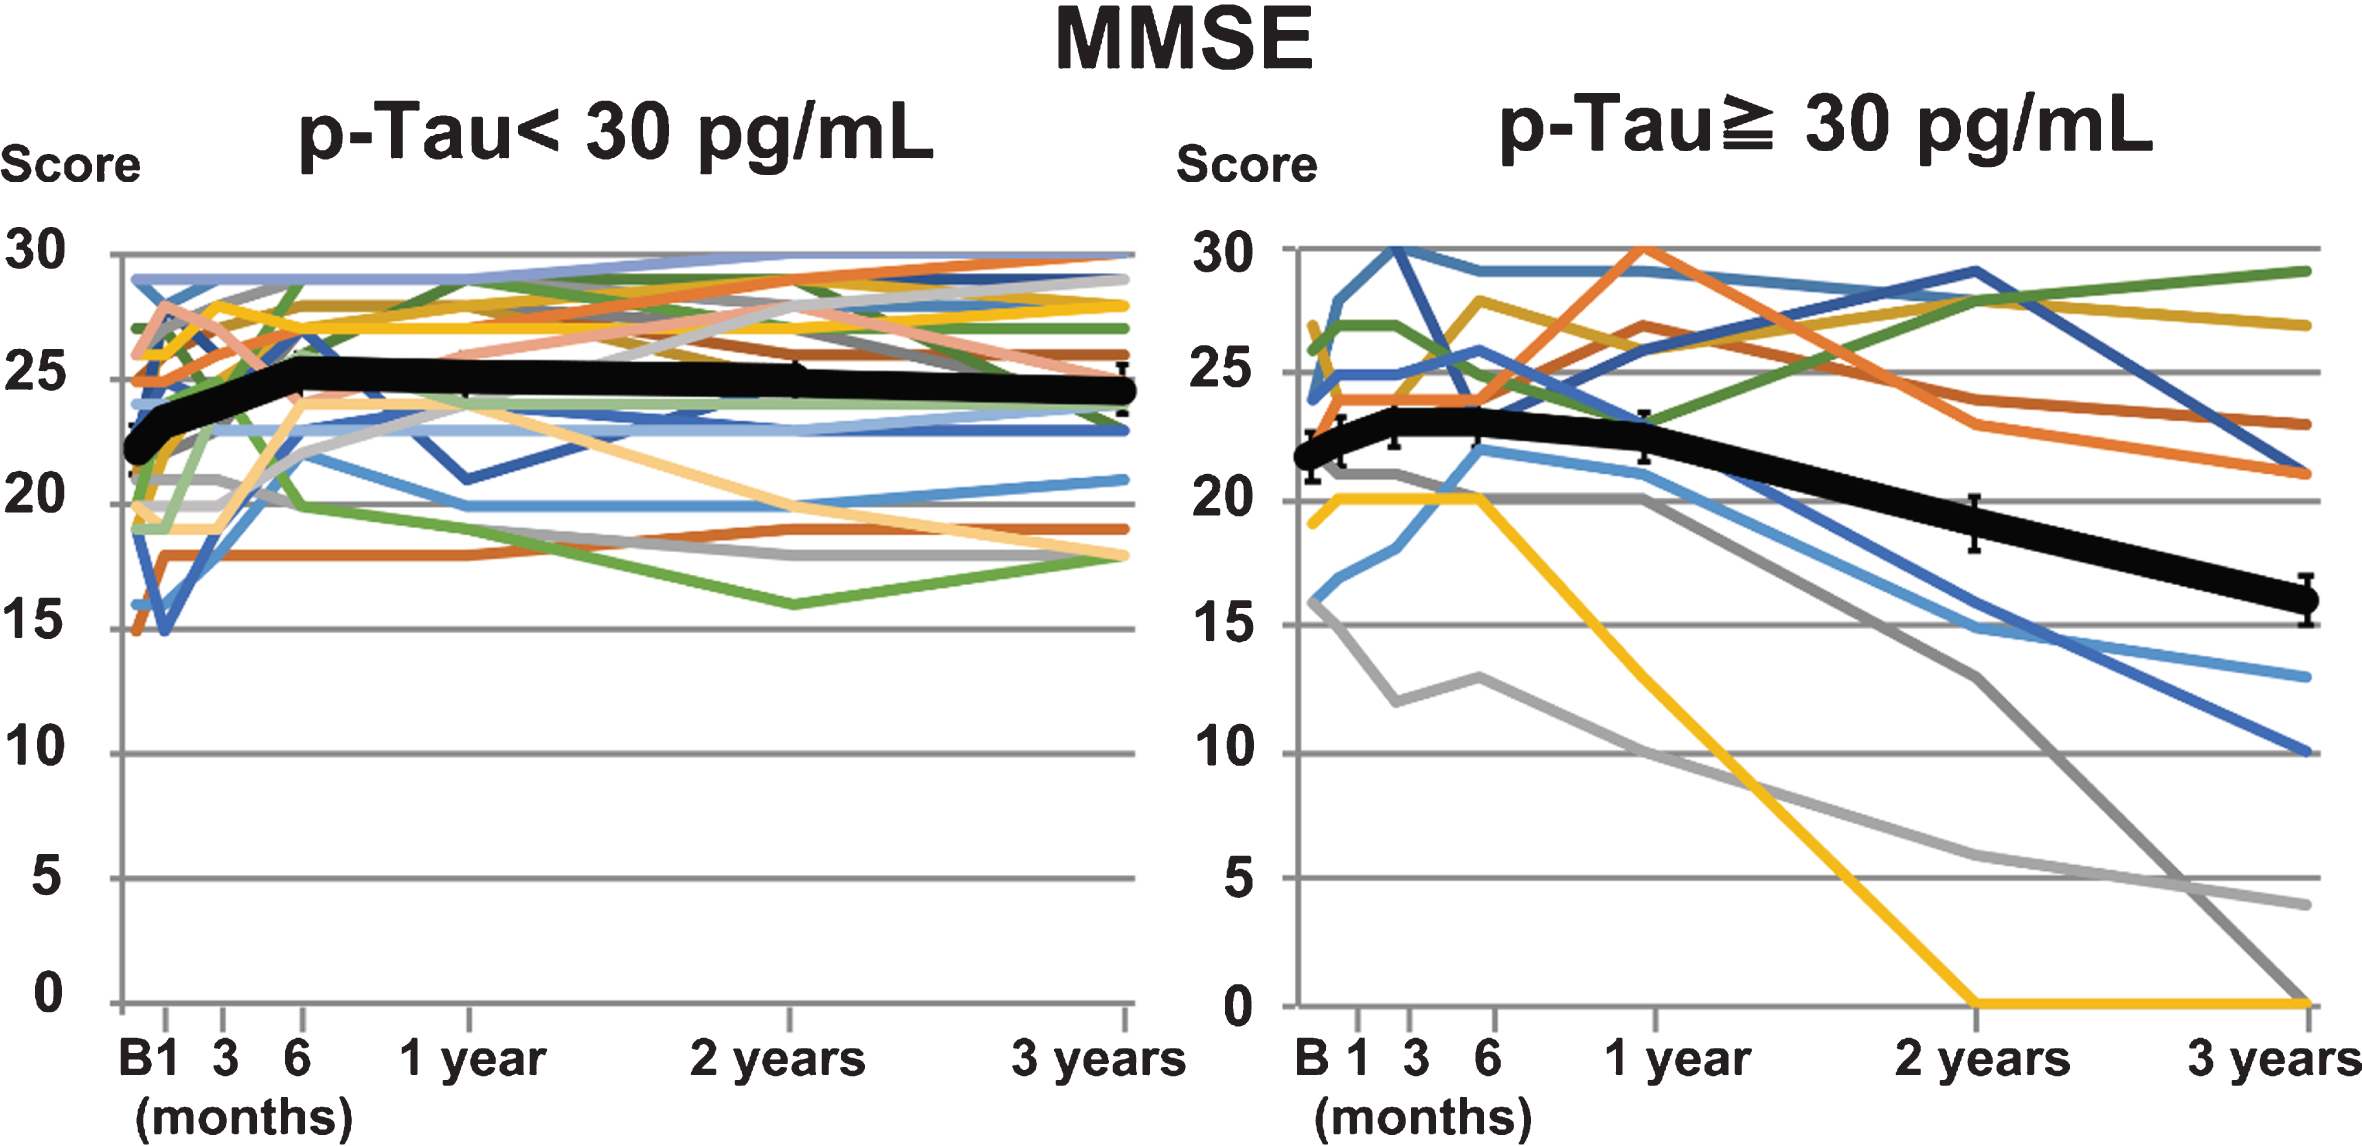 Comparison of MMSE performance in the low and high p-Tau groups. MMSE performance progress in individual patients from before shunting to three years after shunting is shown for the low (<30 pg/mL, n = 24) and high (≥30 pg/mL, n = 11) p-Tau groups. The black line shows the average value in each group. A temporary improvement was observed in the high p-Tau group, while the improvement in the low p-Tau group was maintained throughout follow-up.